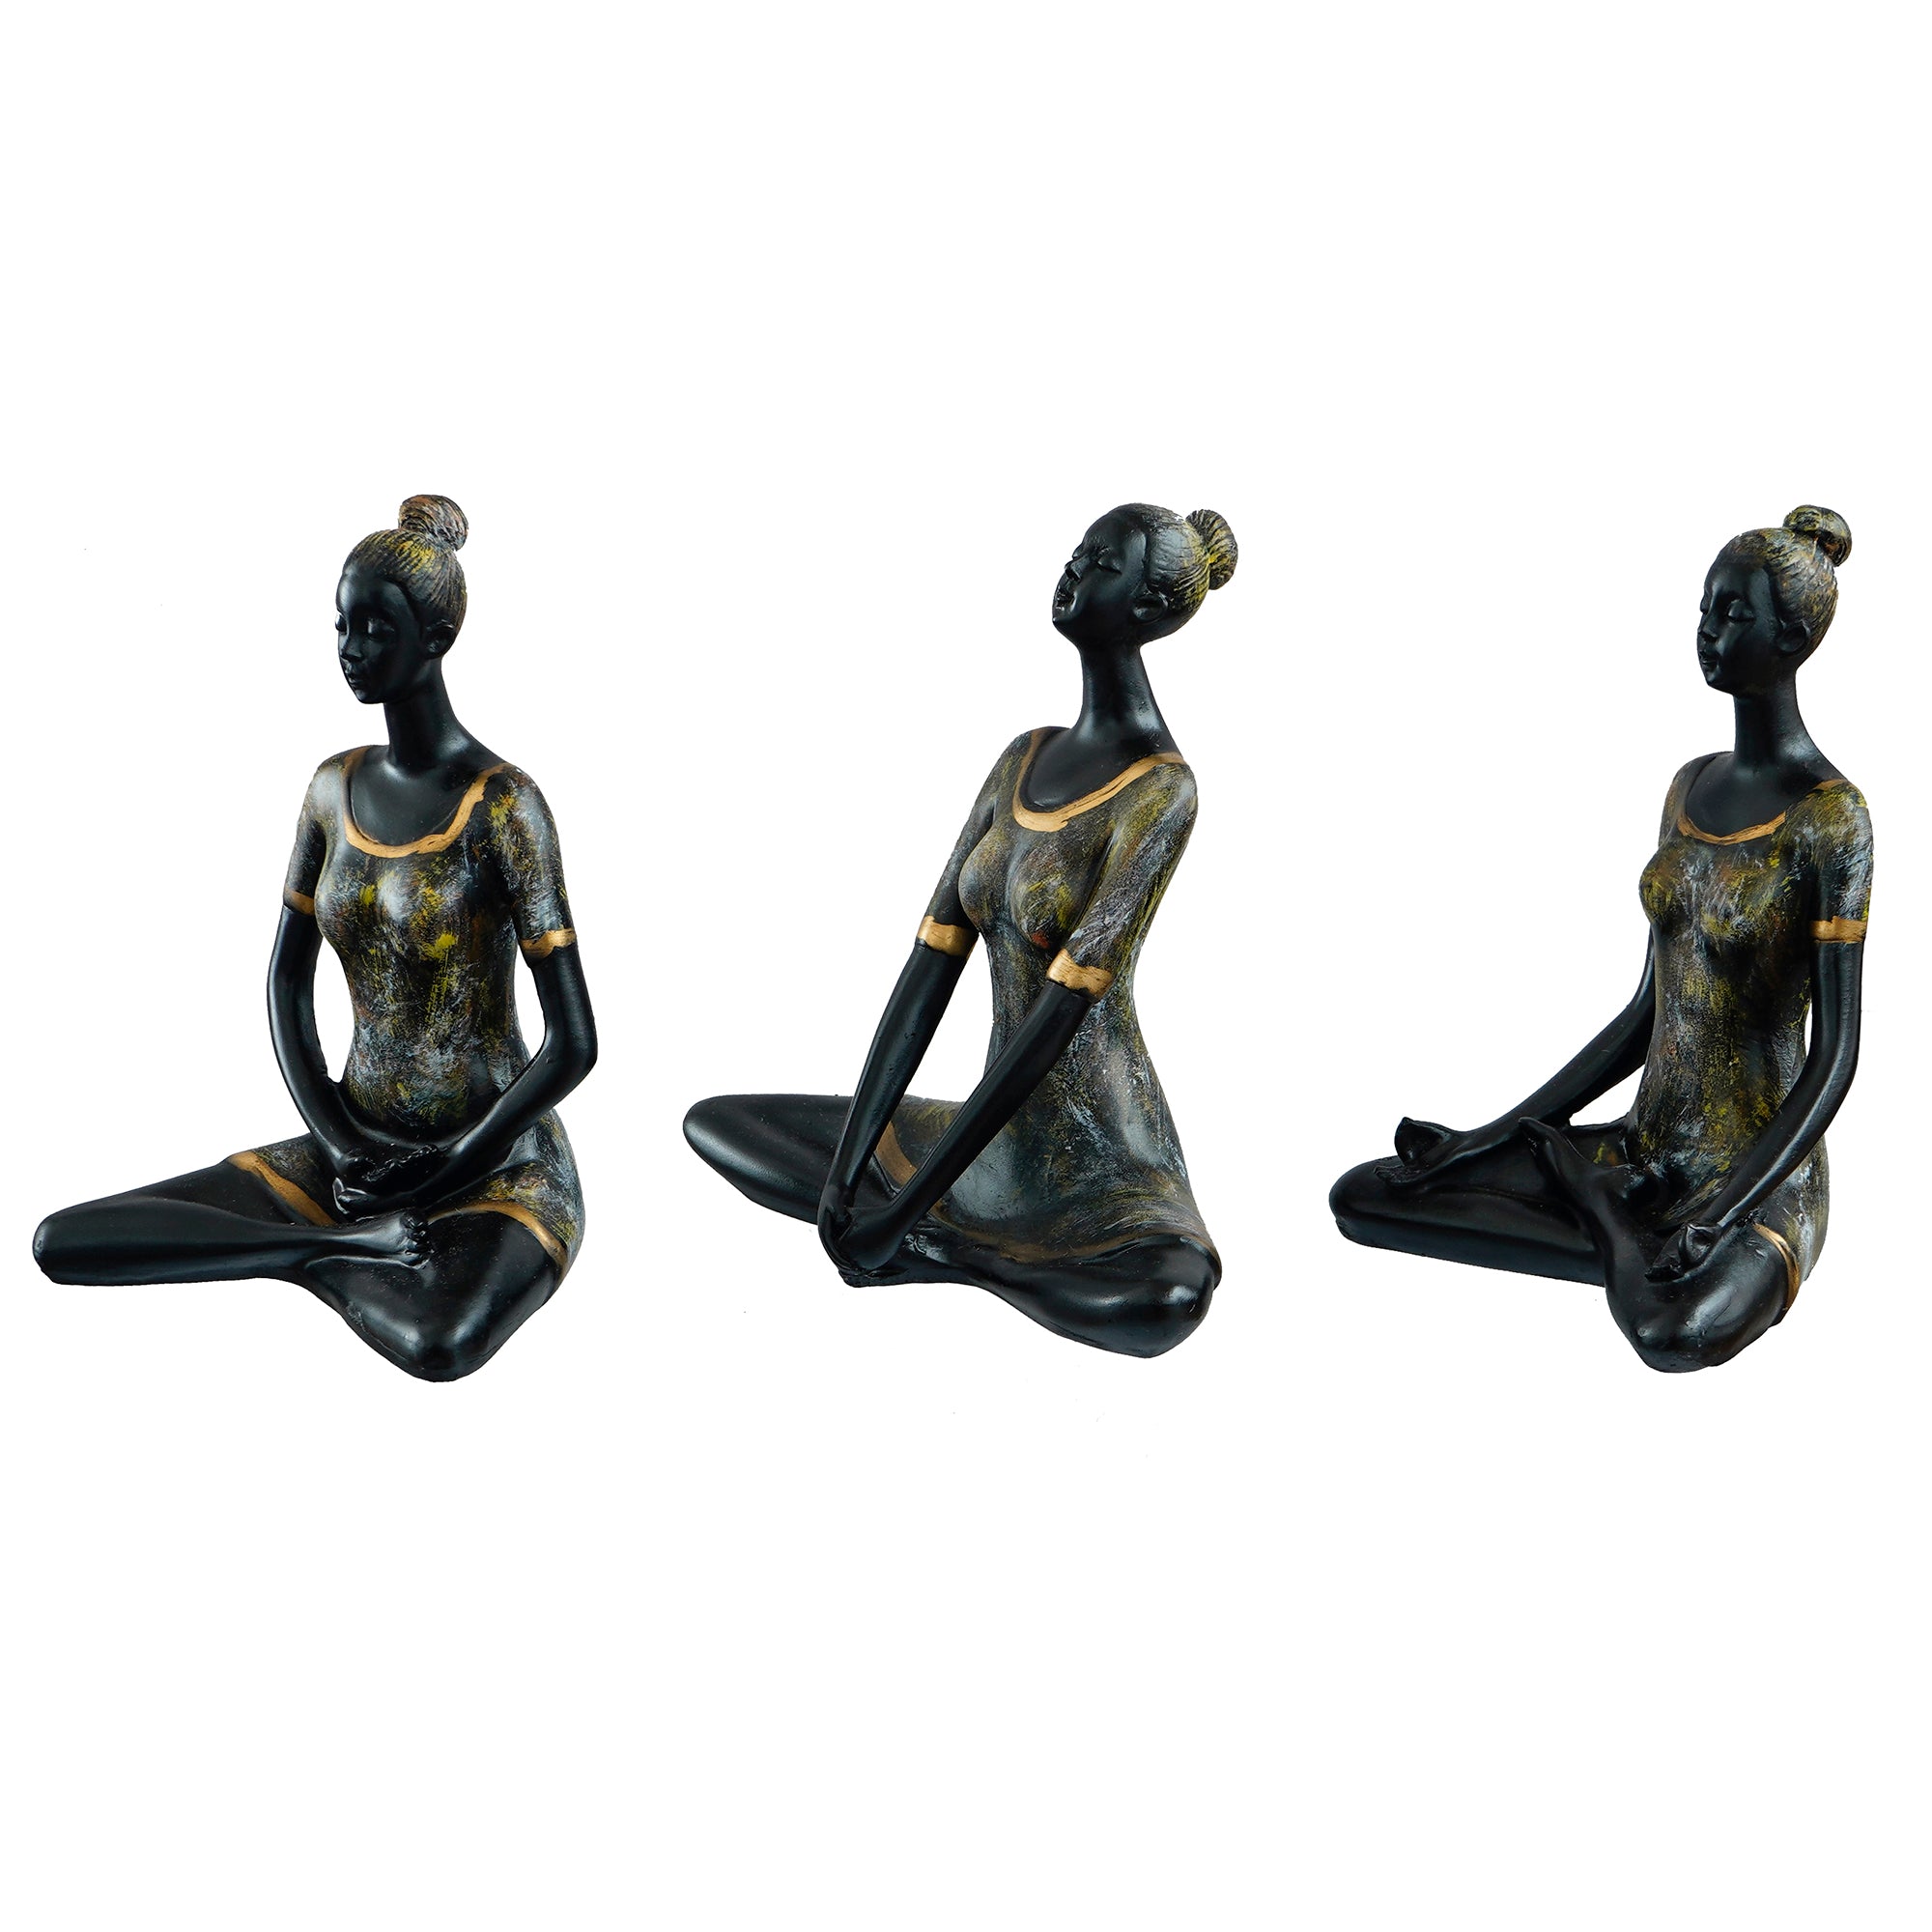 Set of 3 Ladies in Sukhasana, Padmasana, Butterfly Yoga Poses Handcrafted Decorative Polyresin Showpieces 6